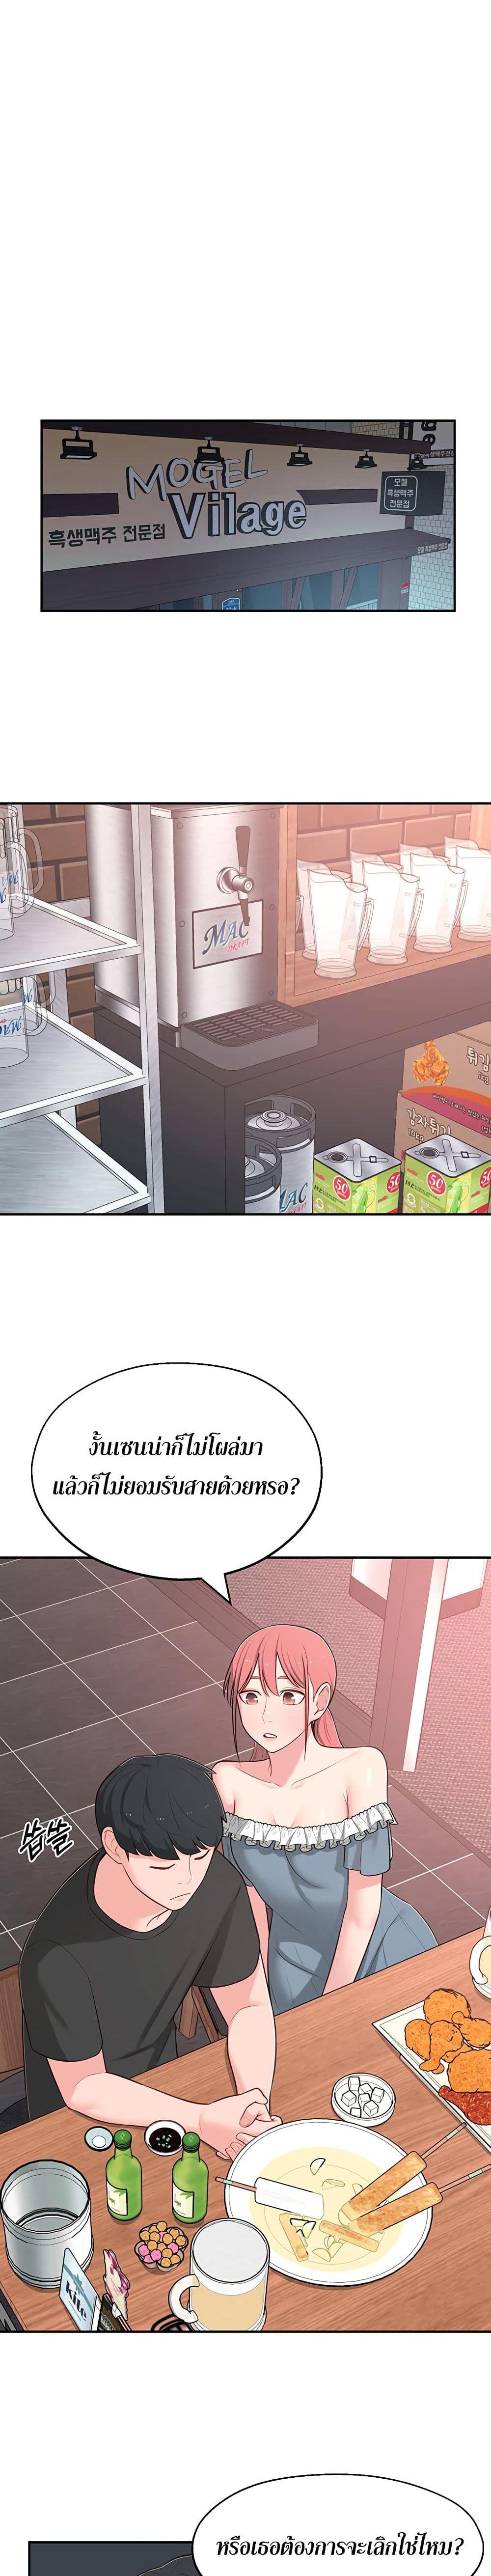 A Knowing Sister 12 ภาพ 23